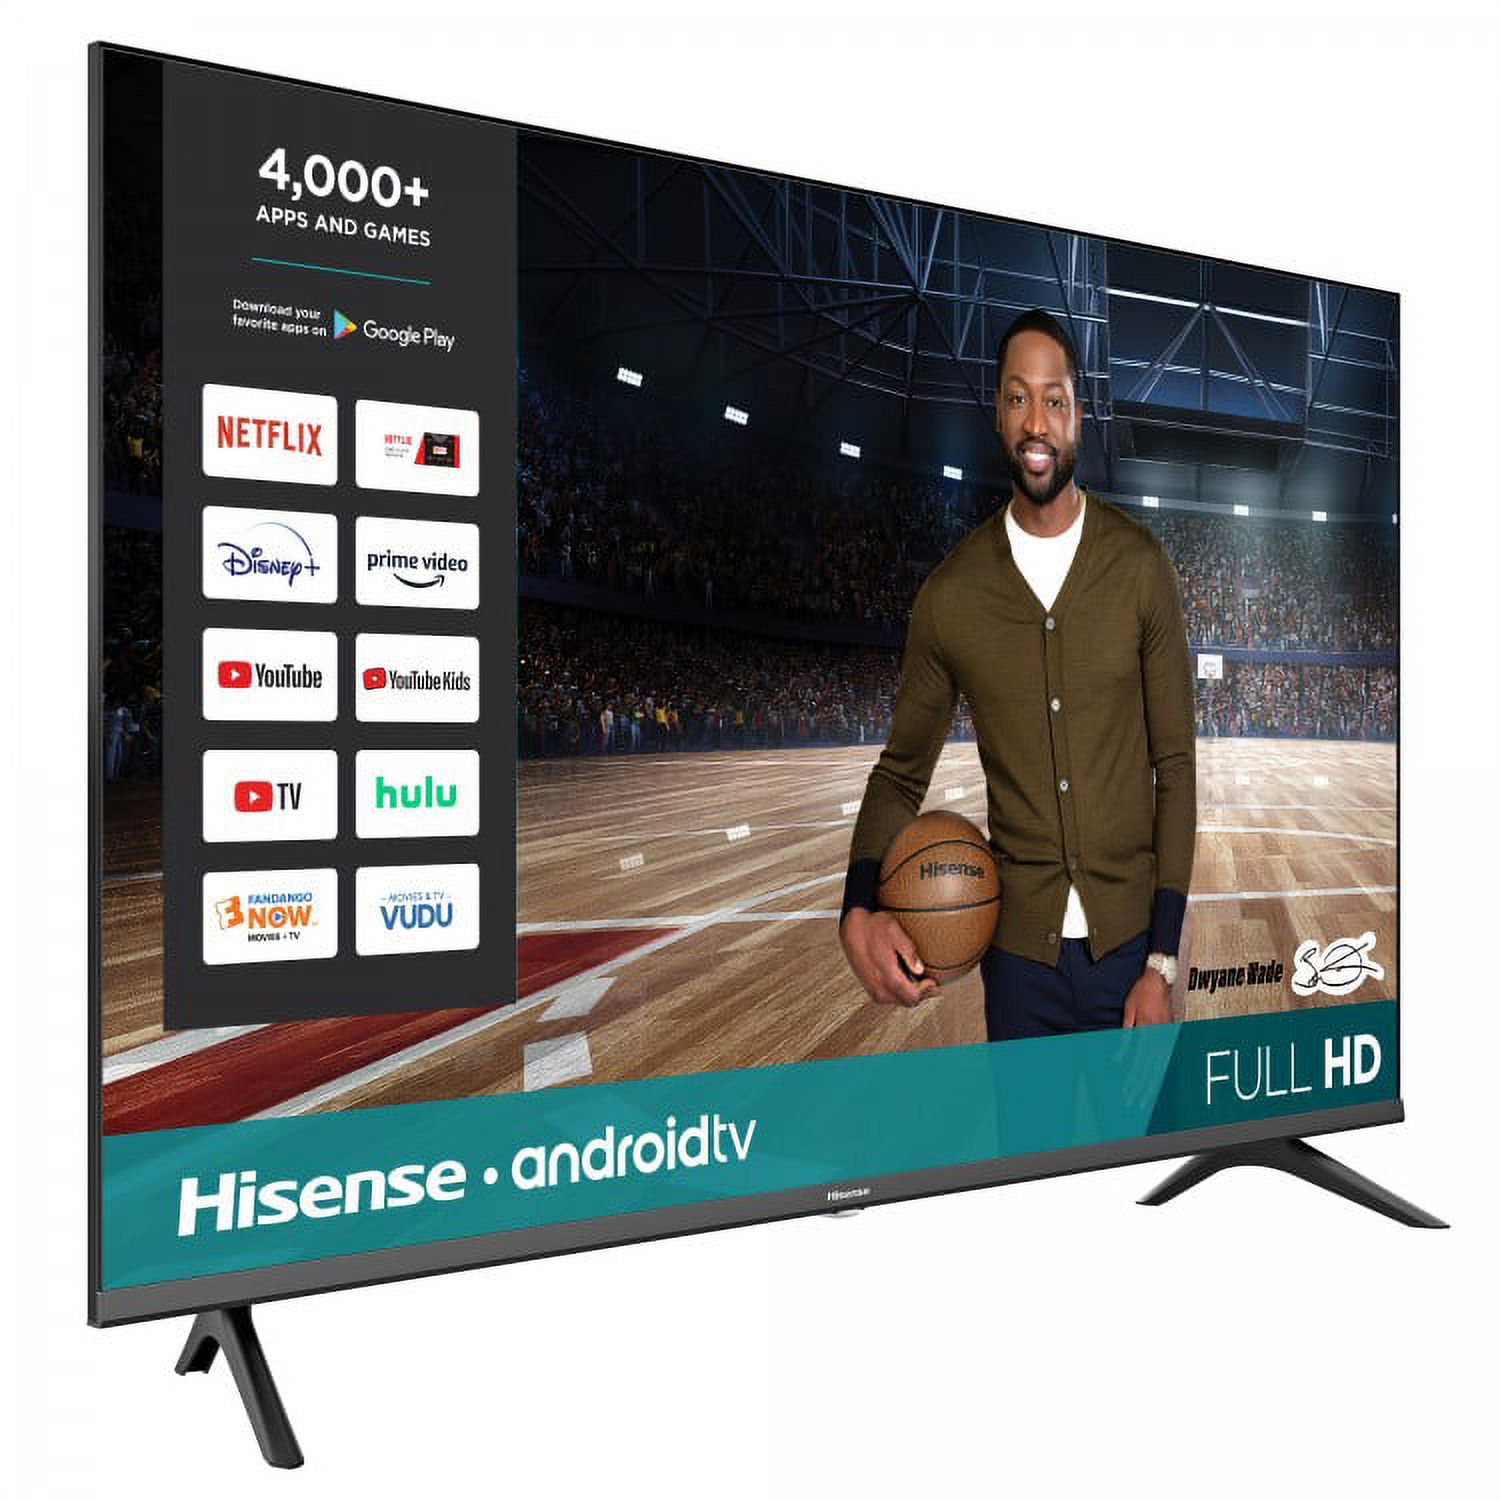 Hisense 43" Class 2K LCD FHD Android Smart TV H55 Series 43H5500G - image 3 of 3